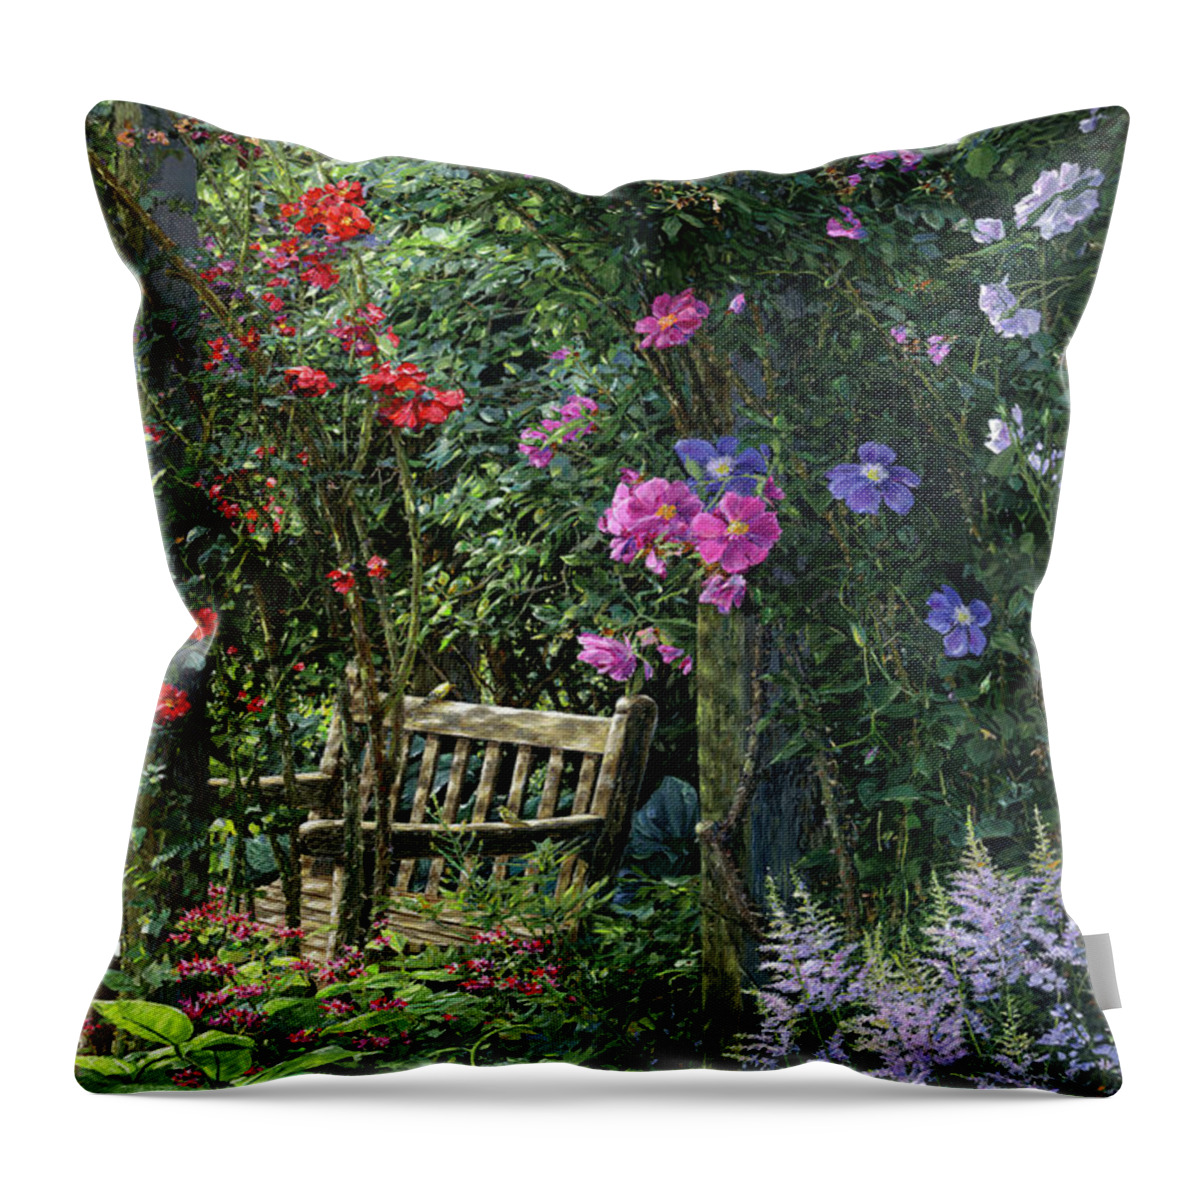 Floral Landscape Throw Pillow featuring the painting Garden Respite #1 by Doug Kreuger